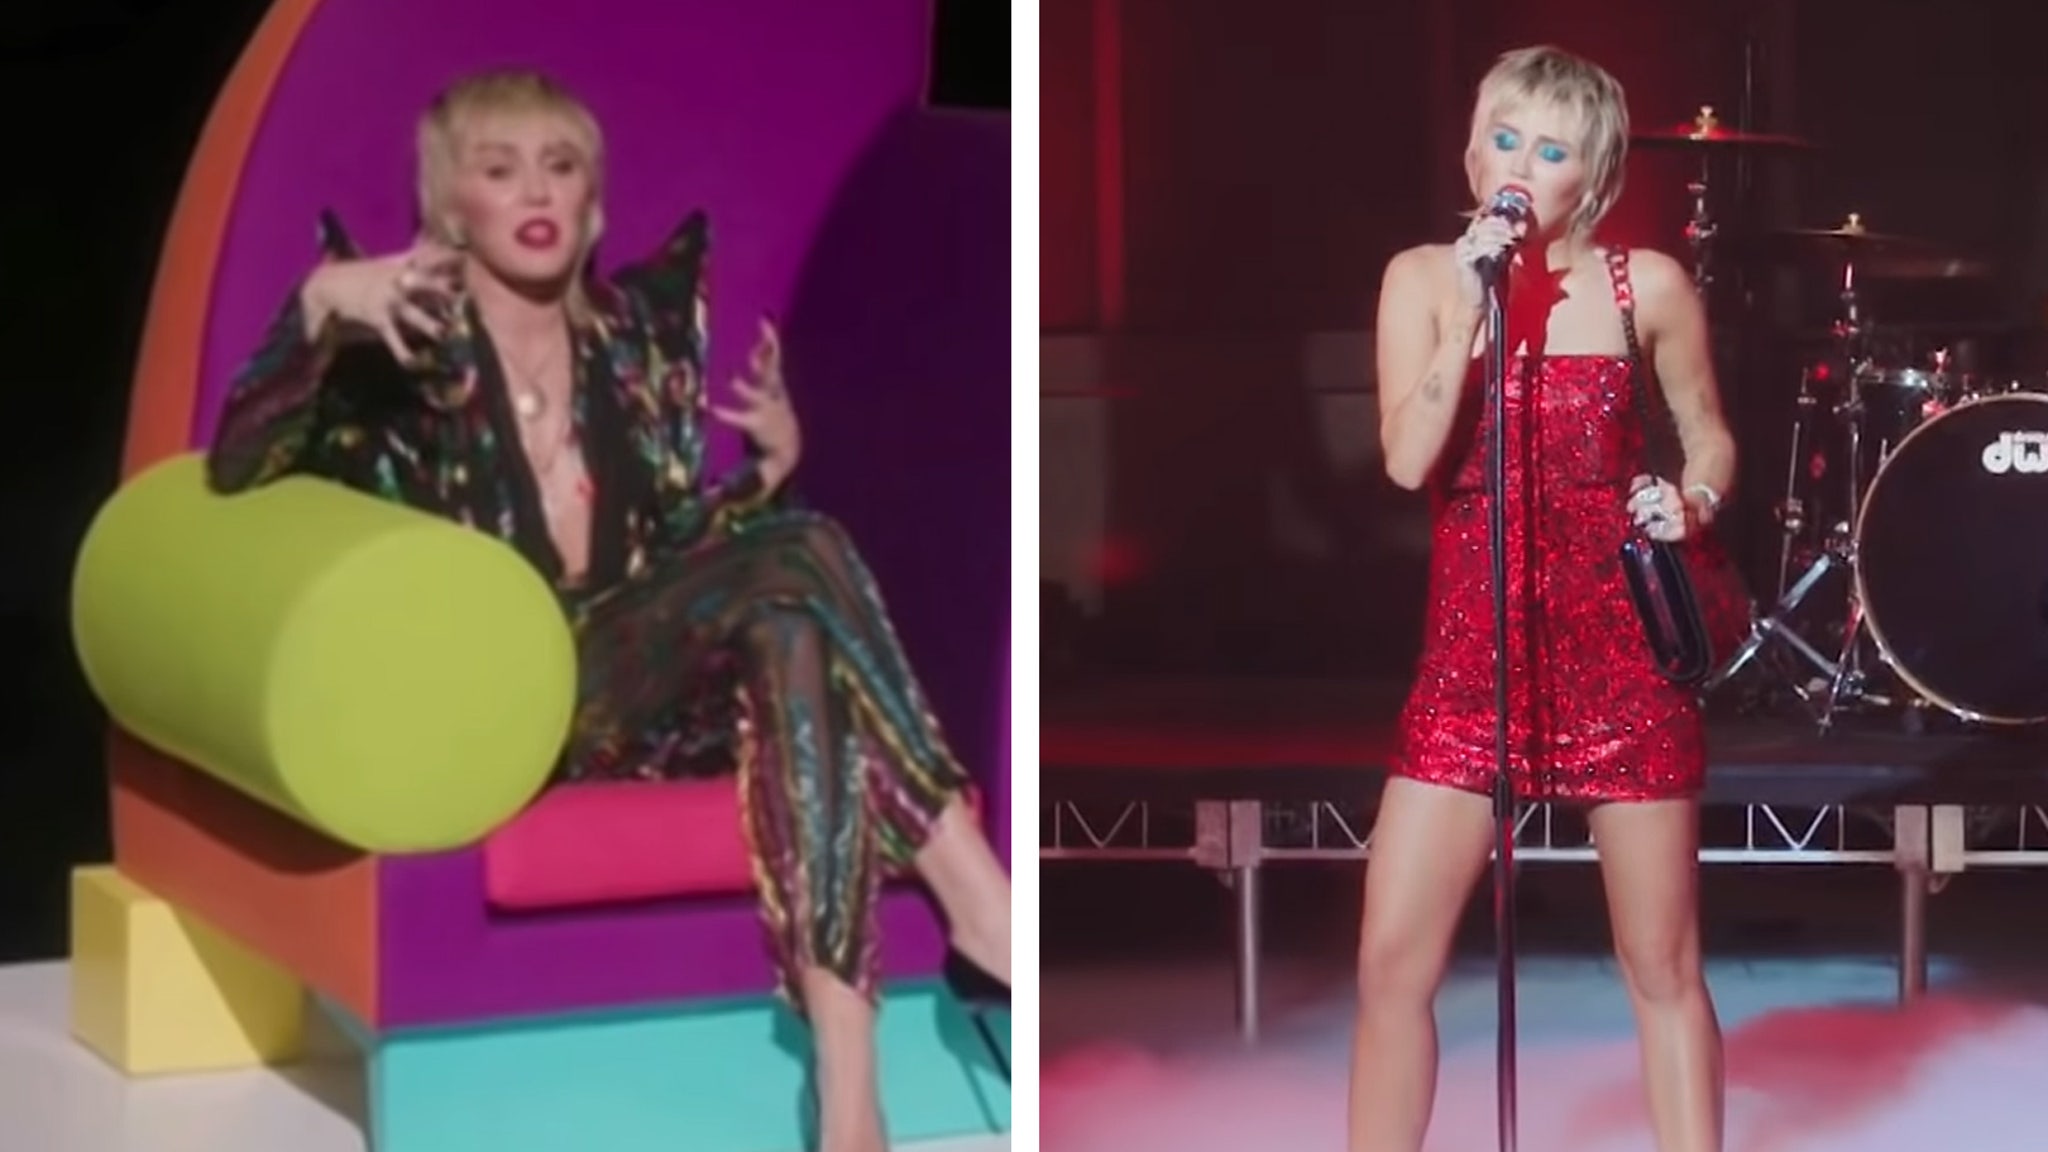 Miley Cyrus Dedicates Maneater Performance To Her Future Ex Husband